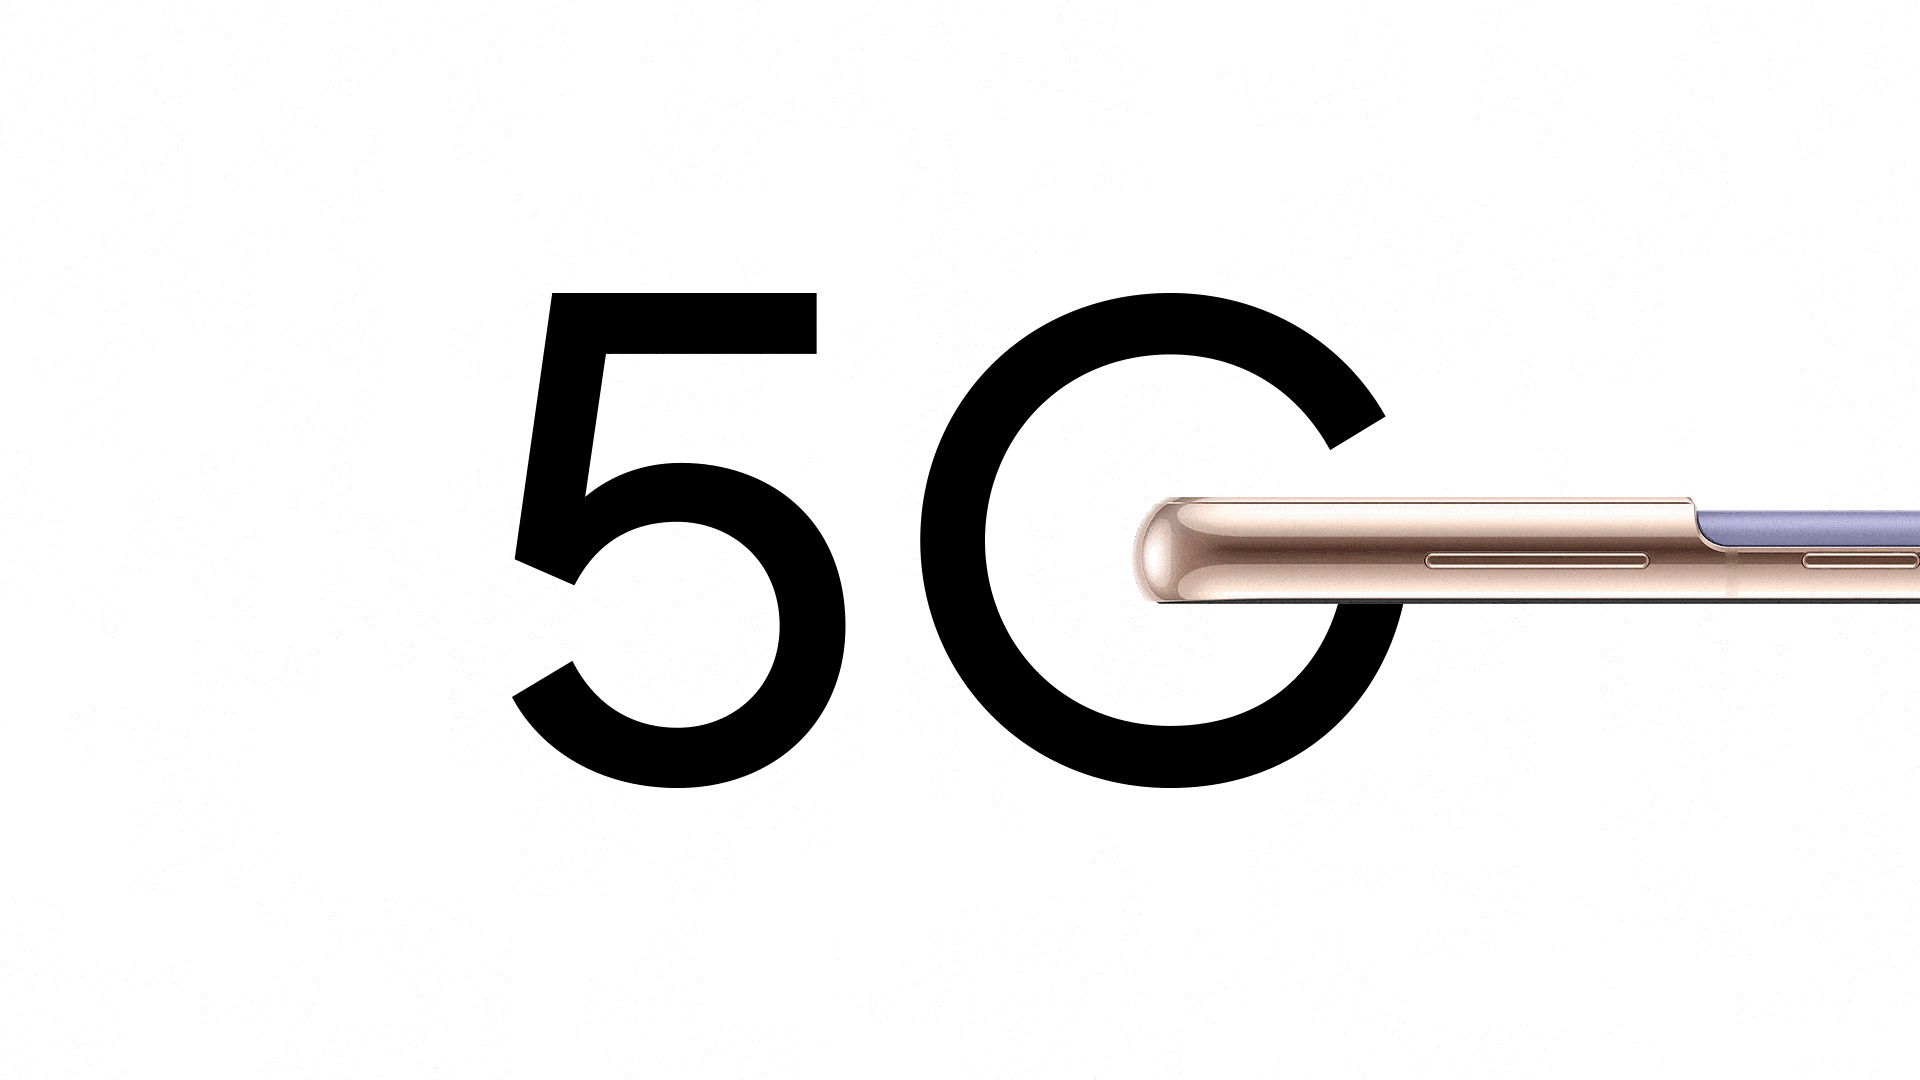 Samsung’s Hyperfast 5G connectivity allows you to do more faster.